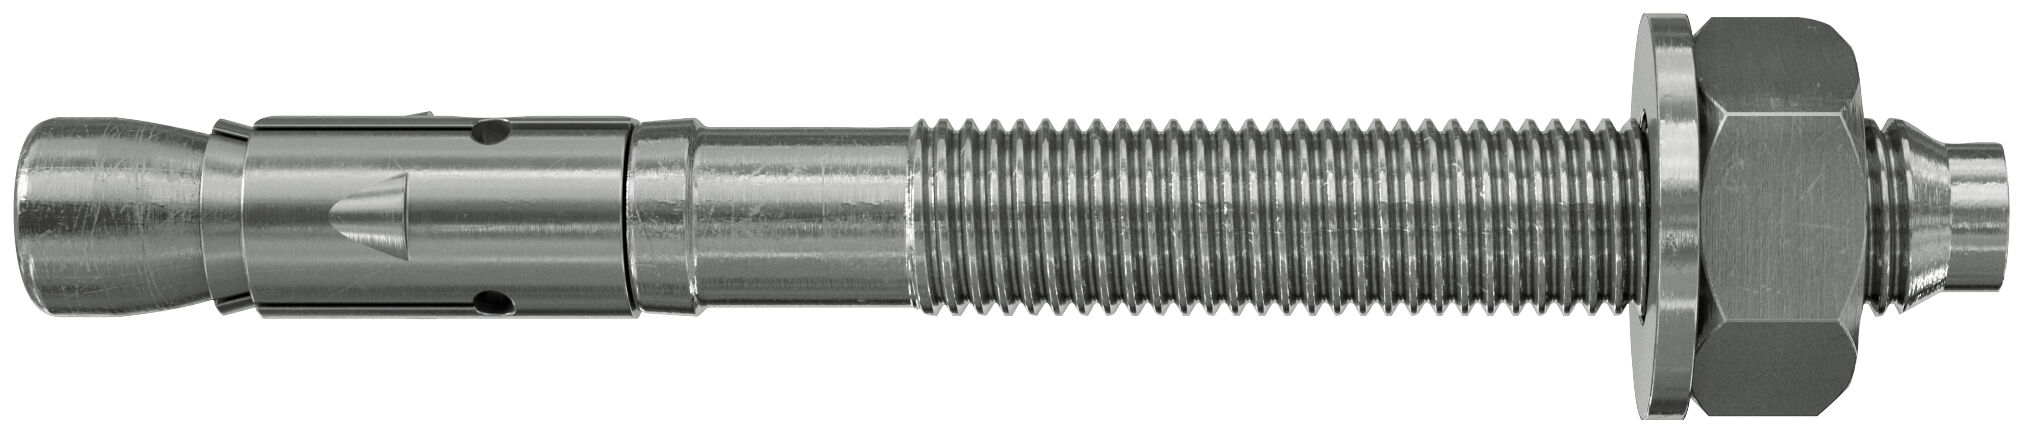 fischer bolt anchor FAZ II 12/30 HCR highly corrosion-resistant steel